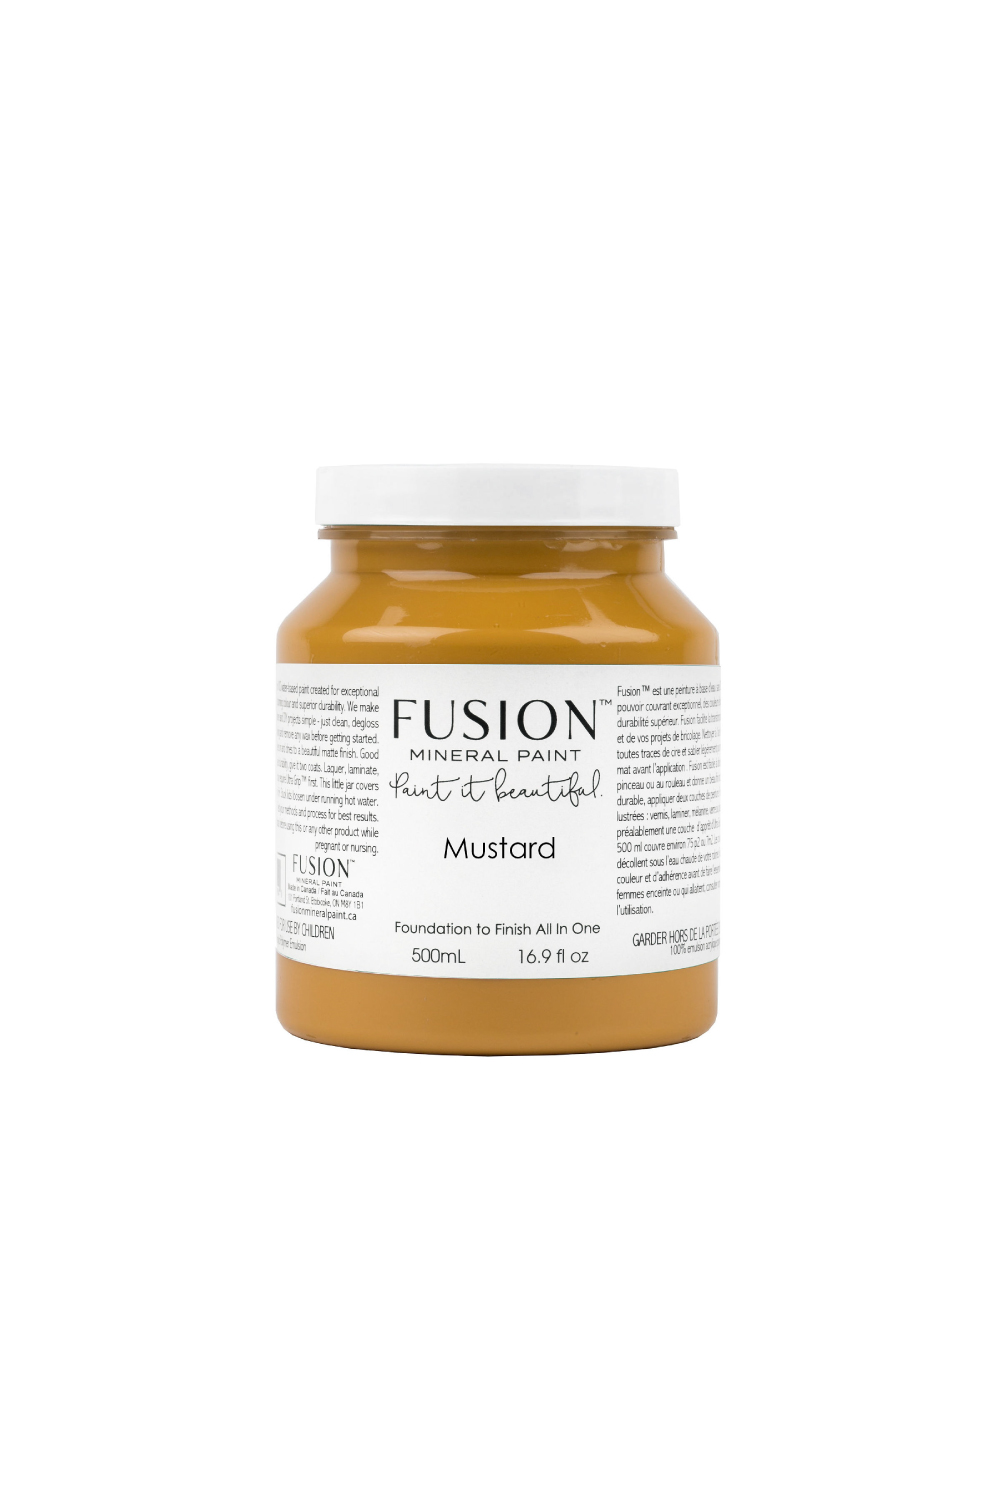 Fusion Mineral Paint vernice ecologica color mostarda